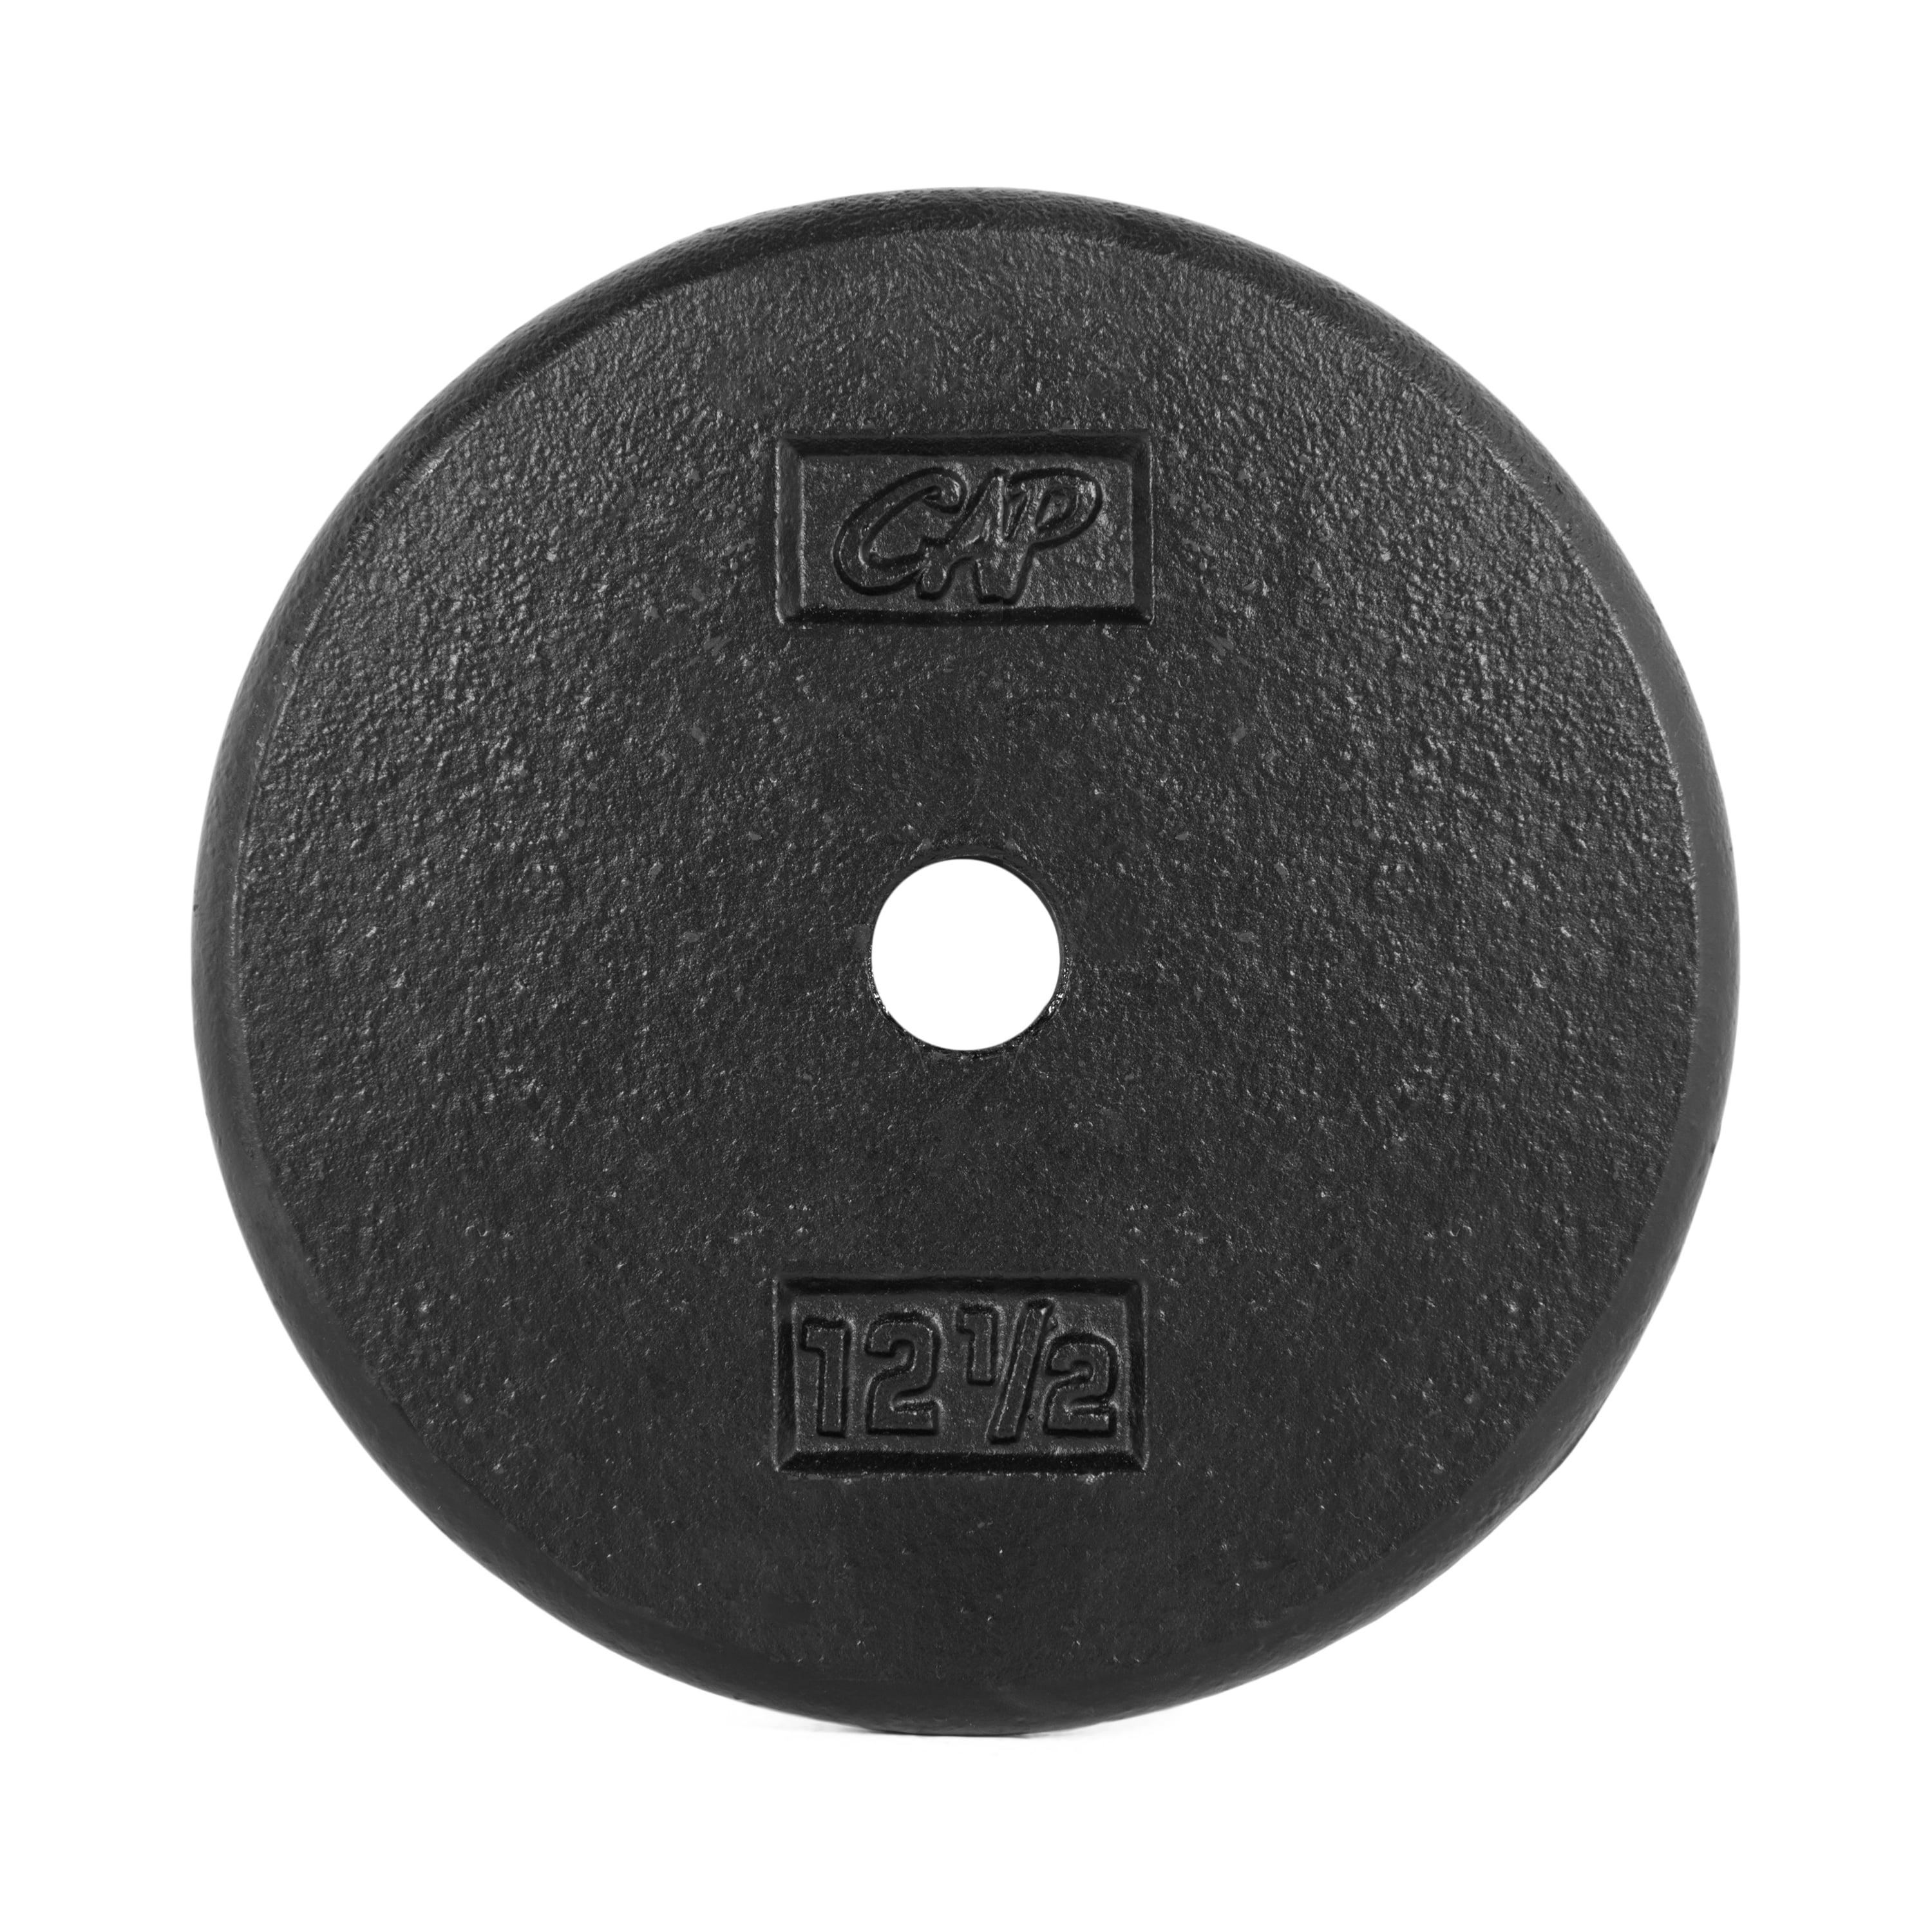 1" TRI-GRIP Cast Iron Disc Weights Plate Barbell Weight Fitness Gym 1.25 to 25 